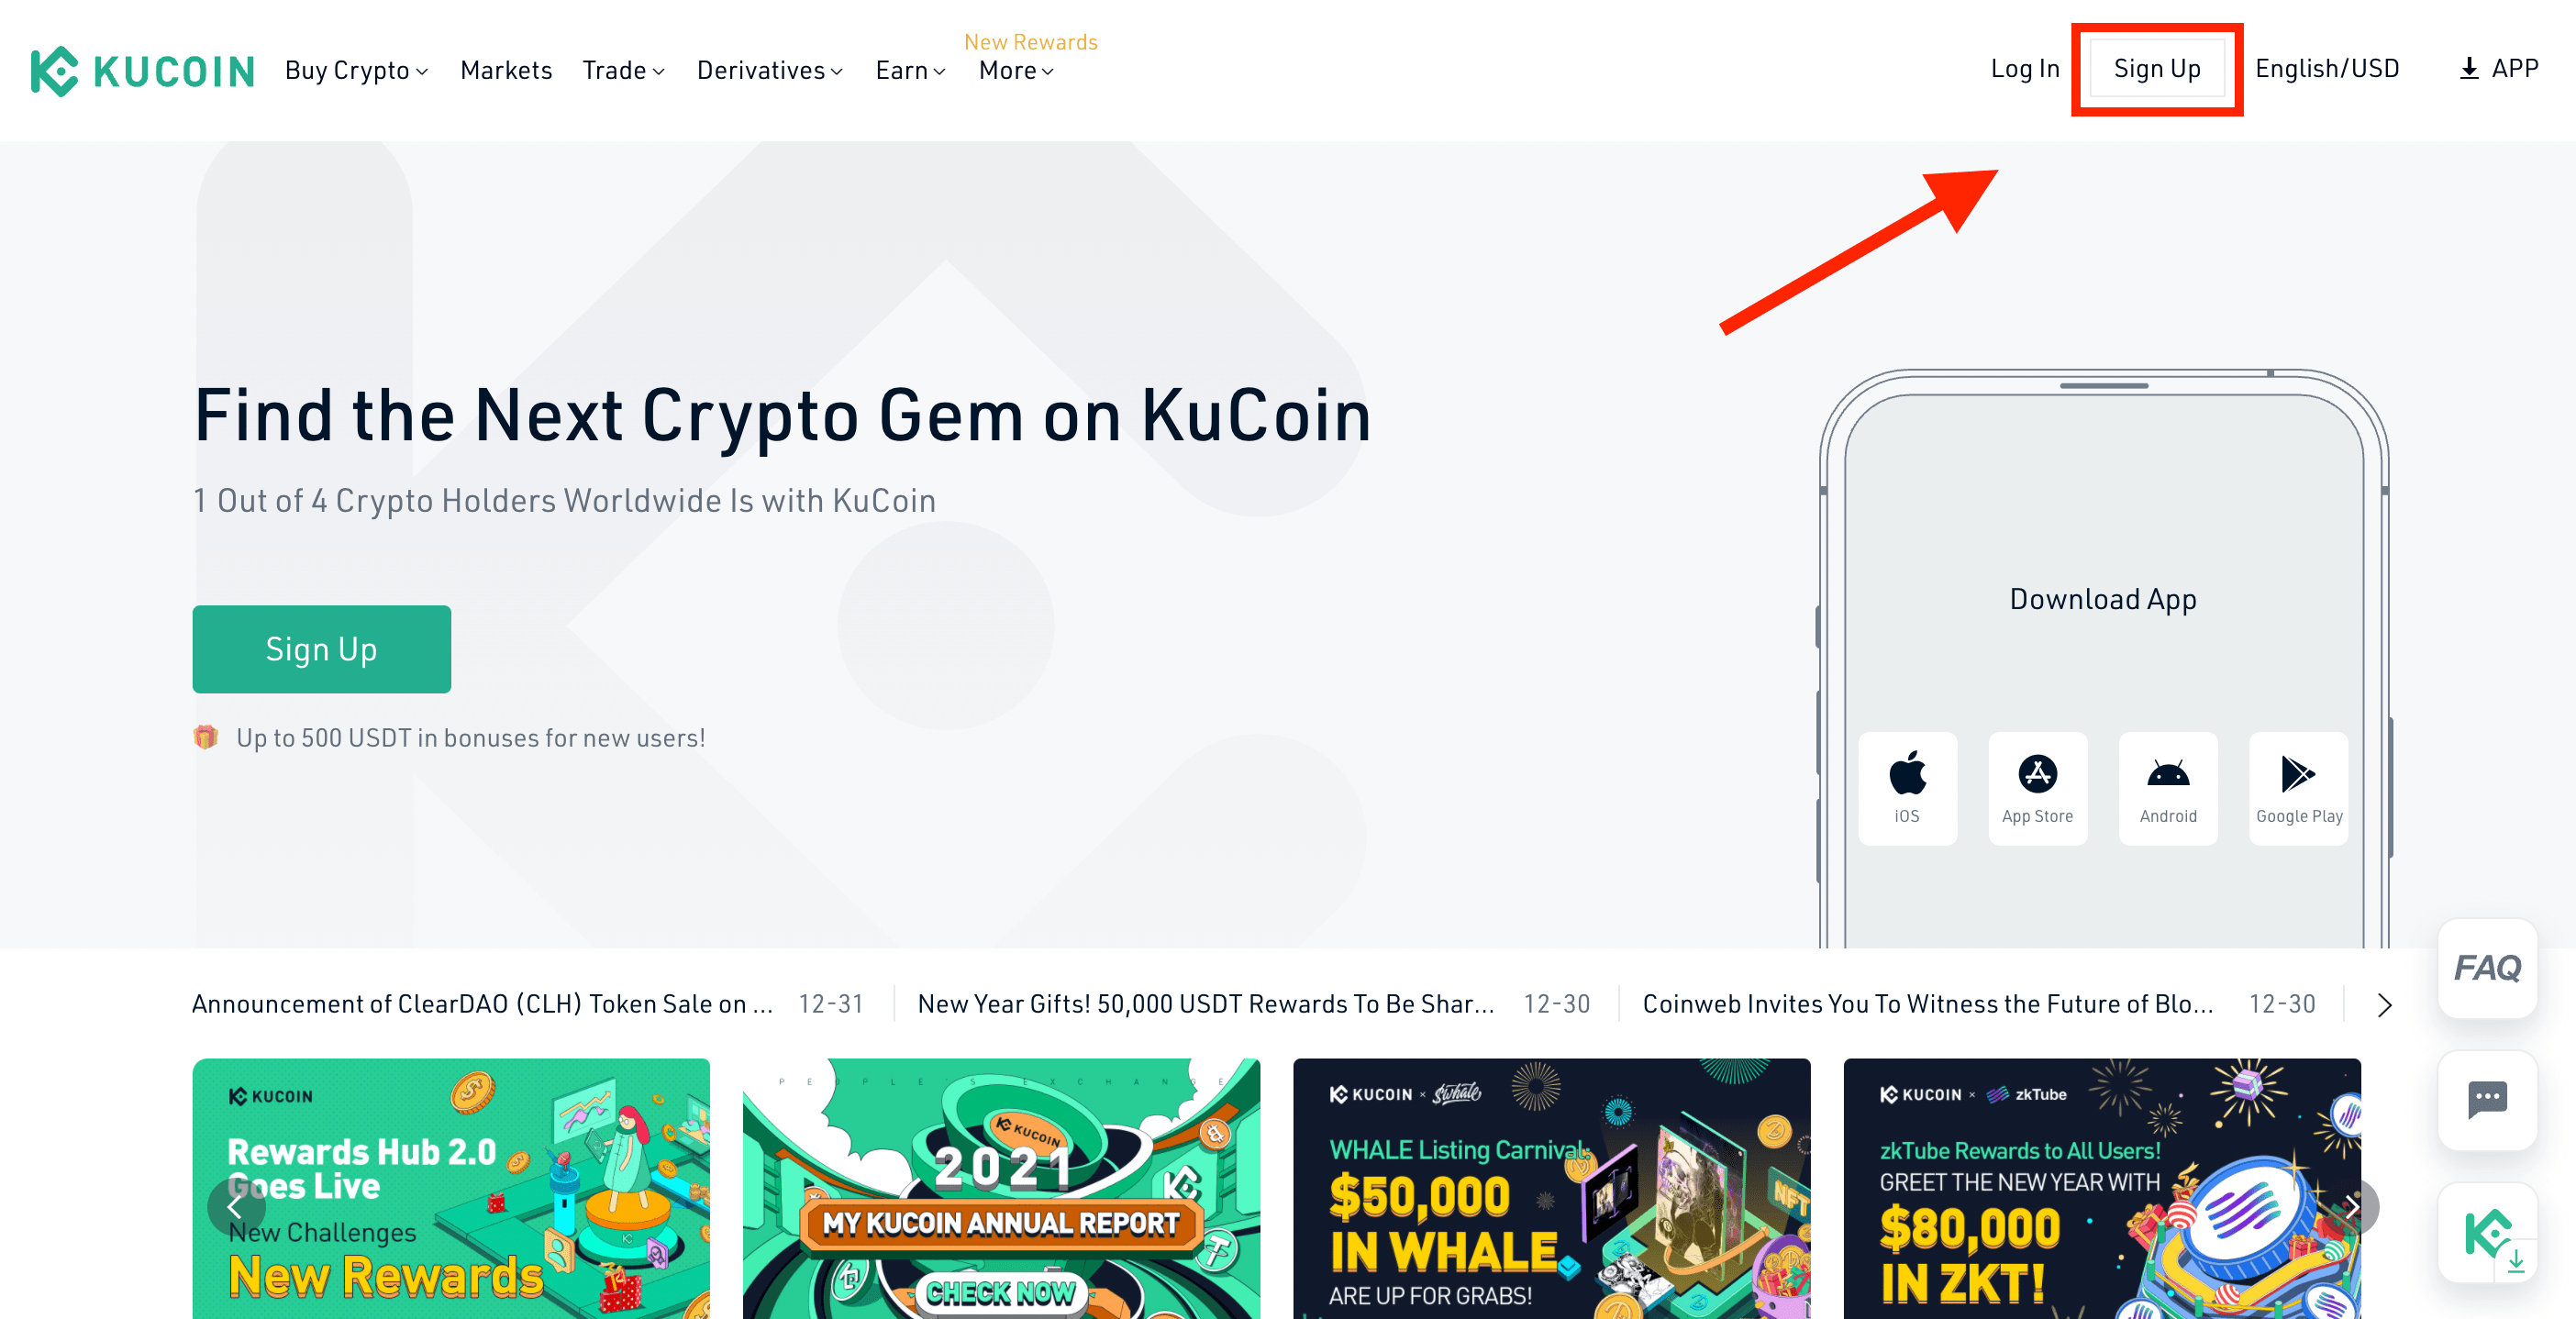 Registration on the KuCoin exchange